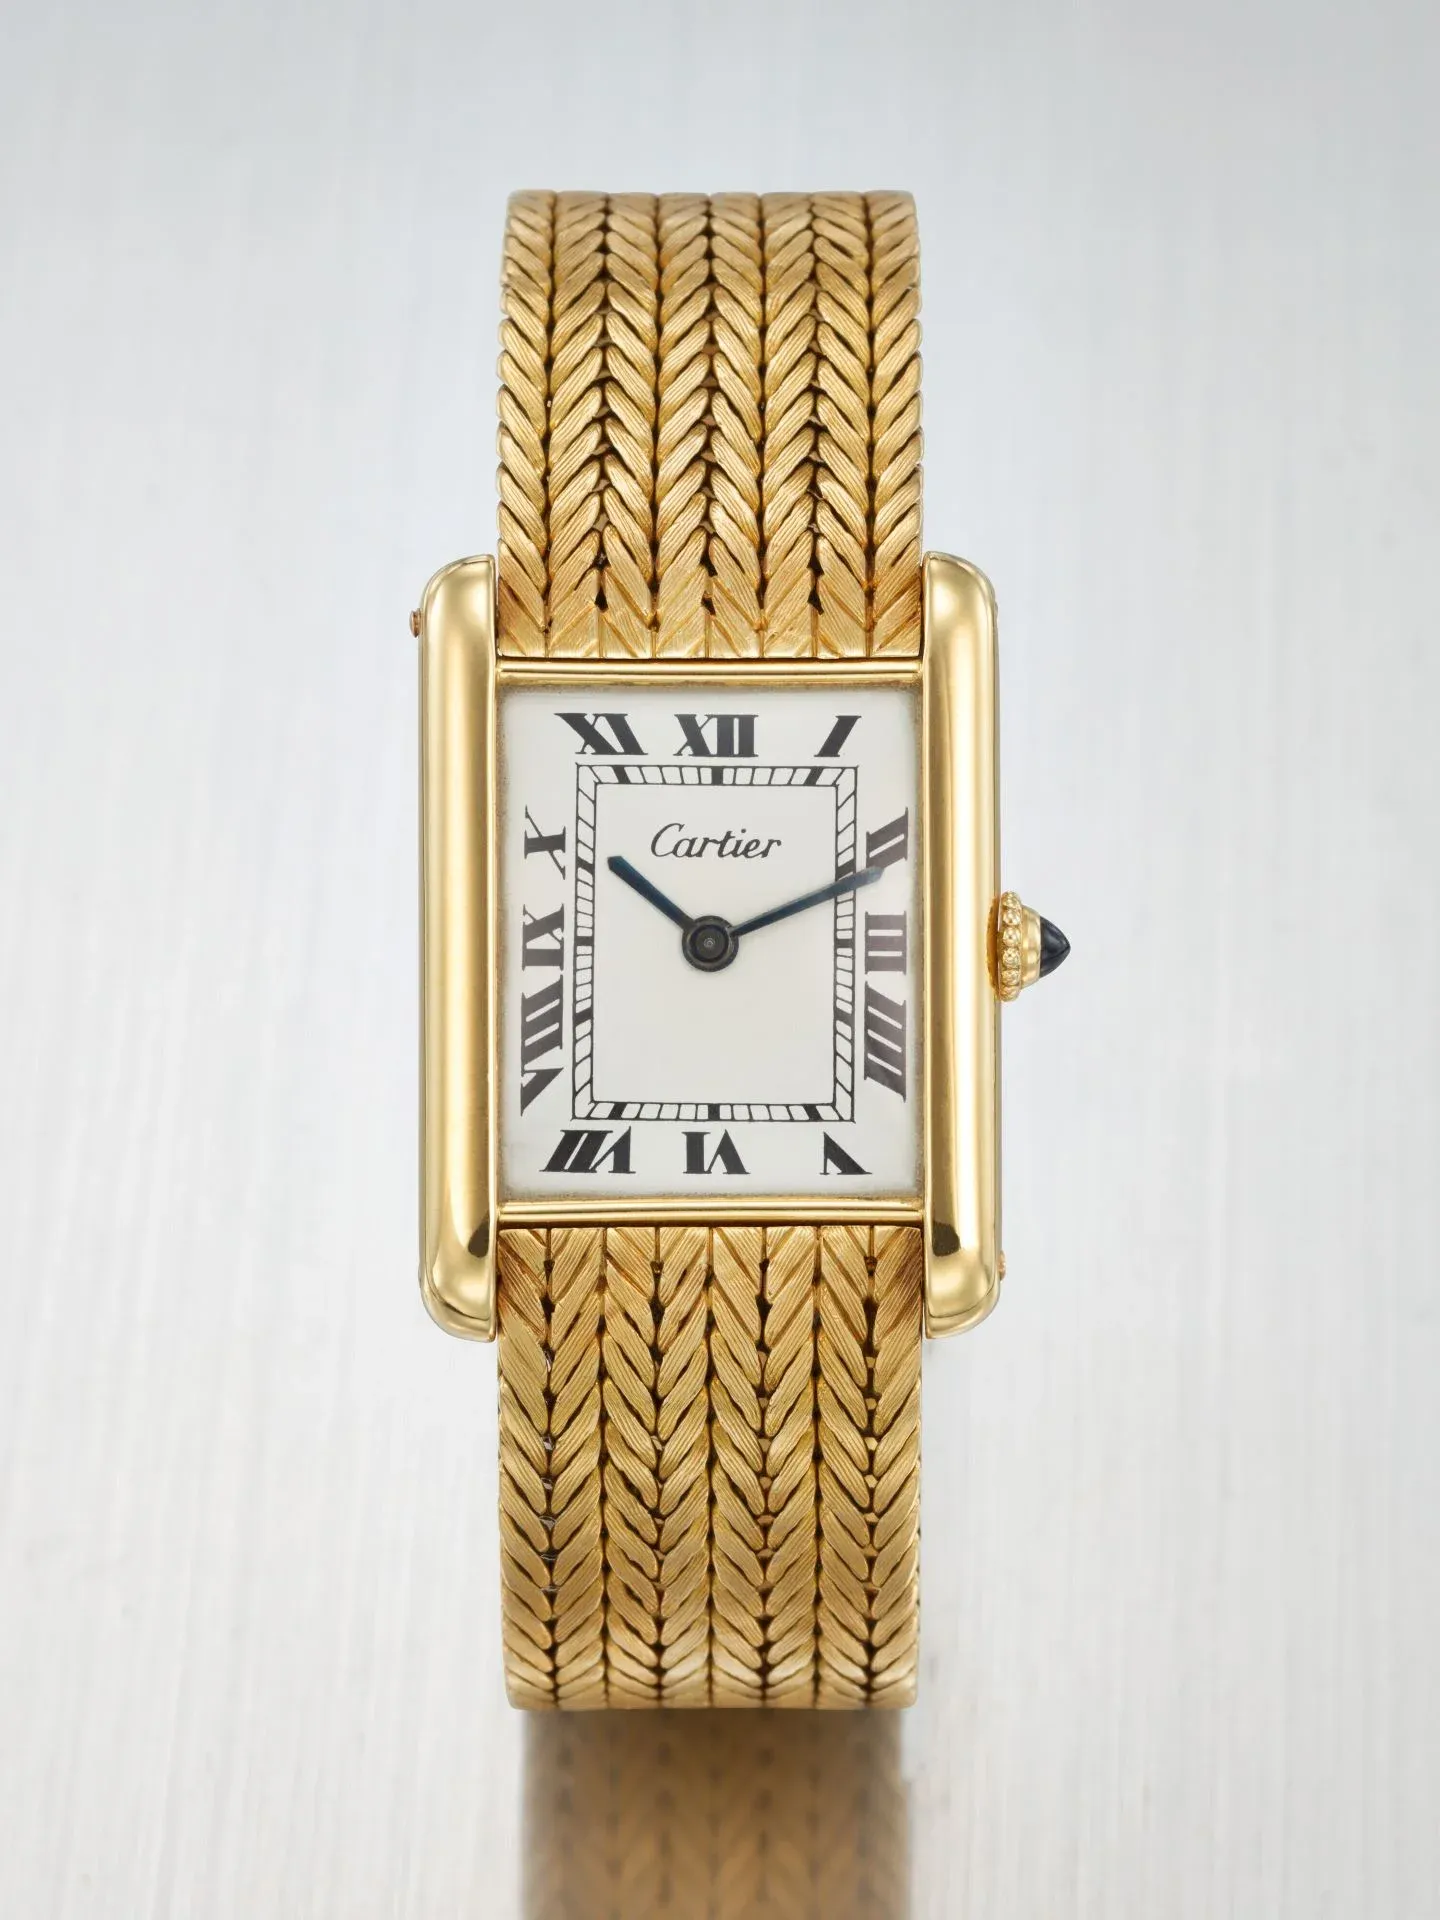 Cartier ‘Tank Louis’ ultra-thin, case and bracelet in 18K gold, signed Cartier London, 1971